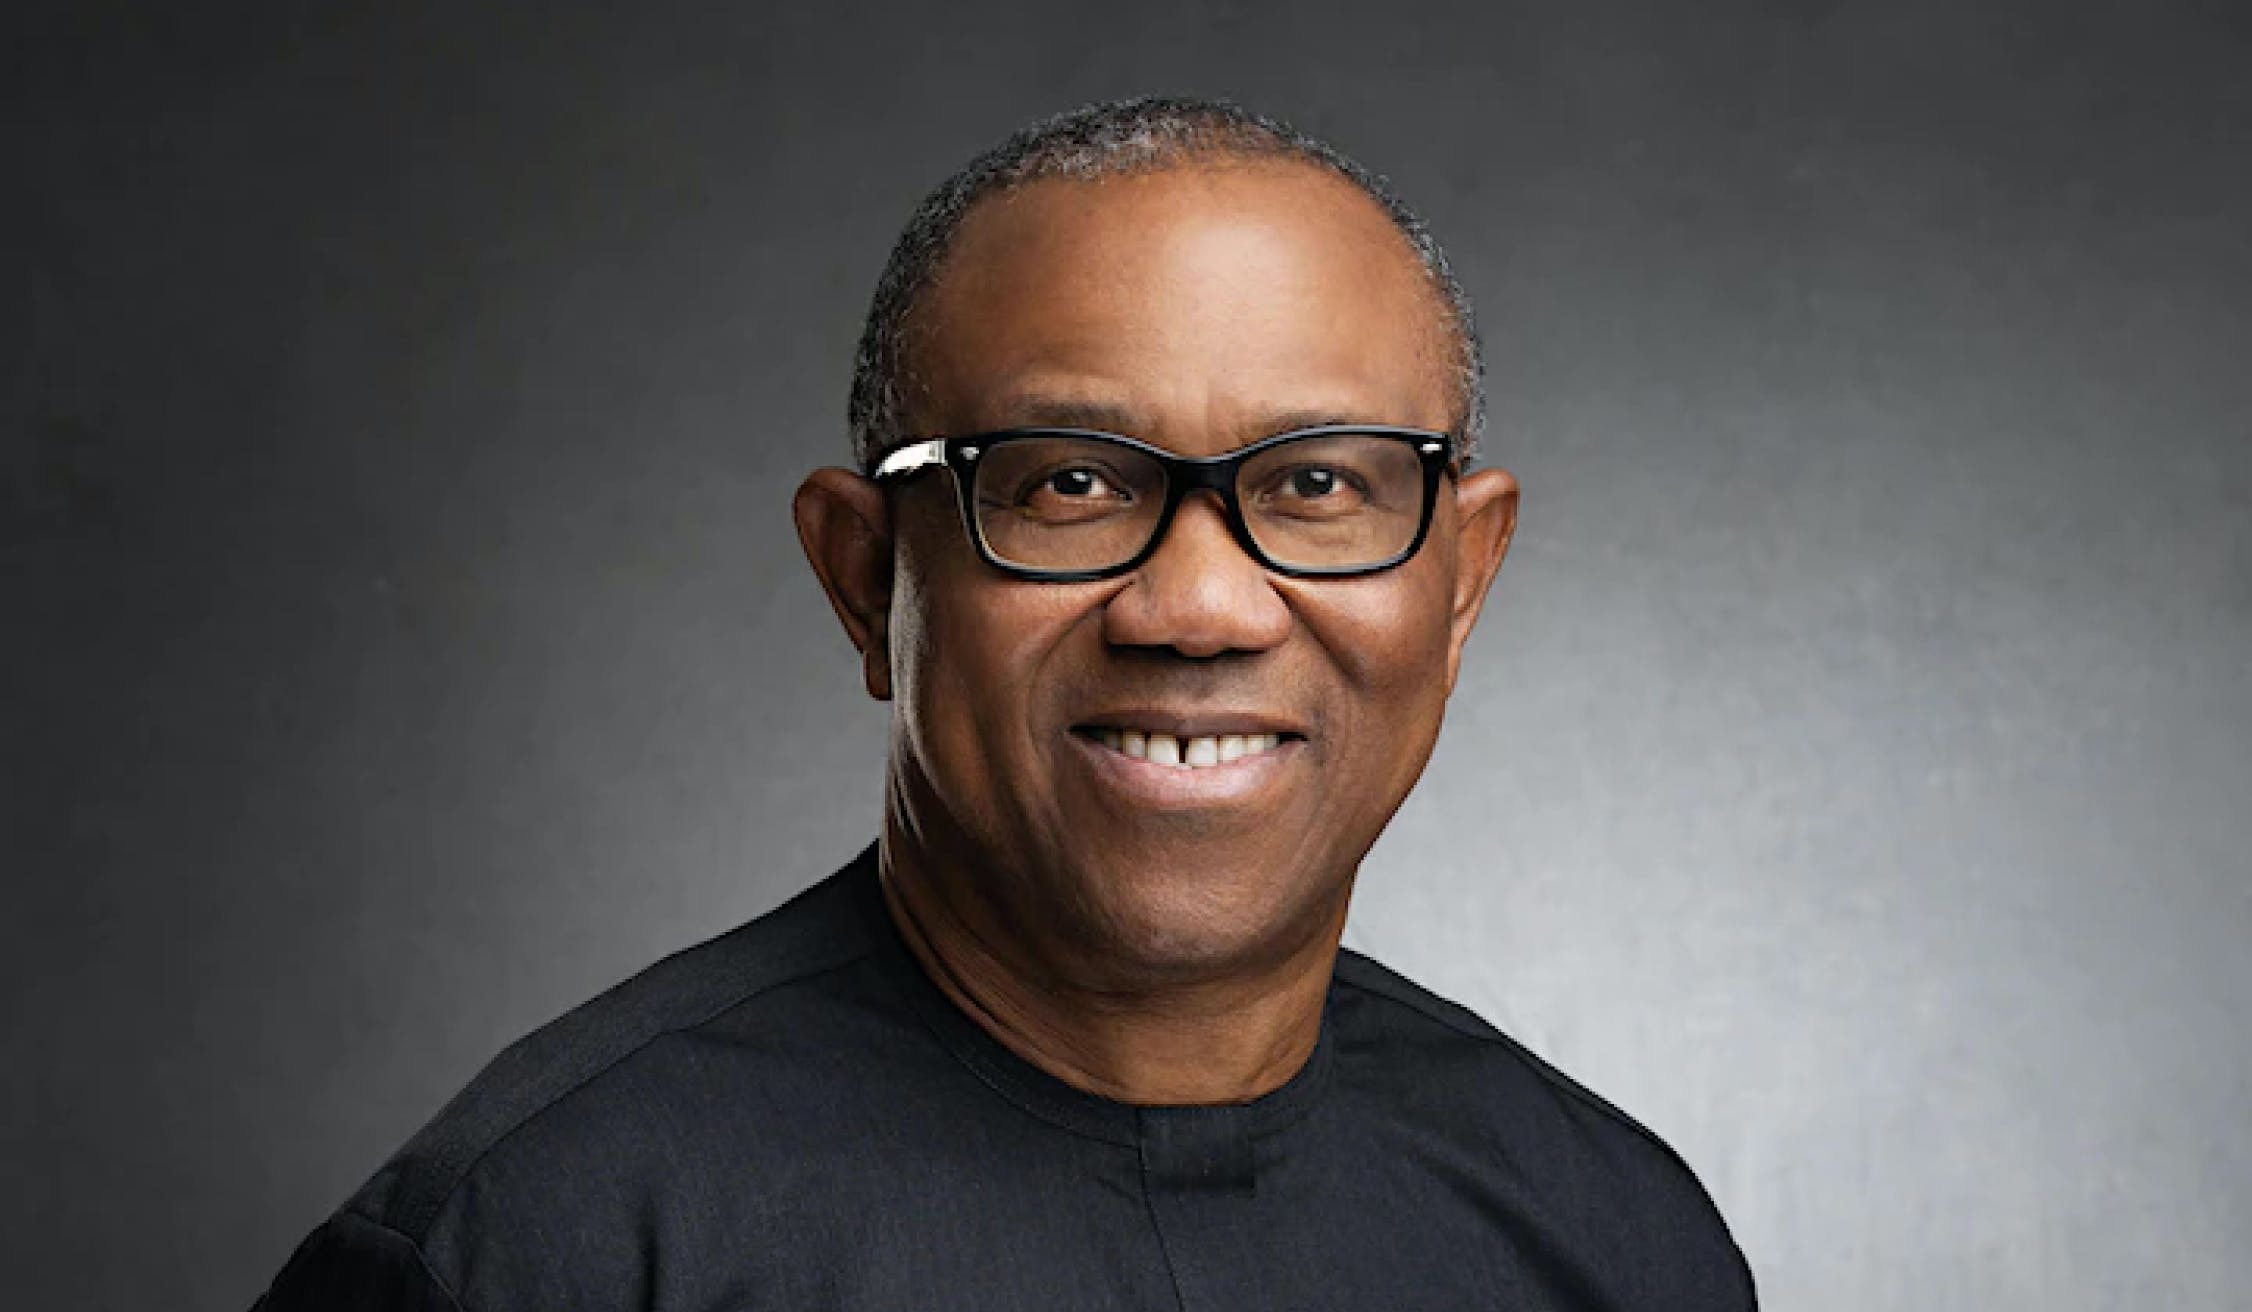 Peter Obi declines attendance at Tinubu’s inauguration, dismisses protest speculations